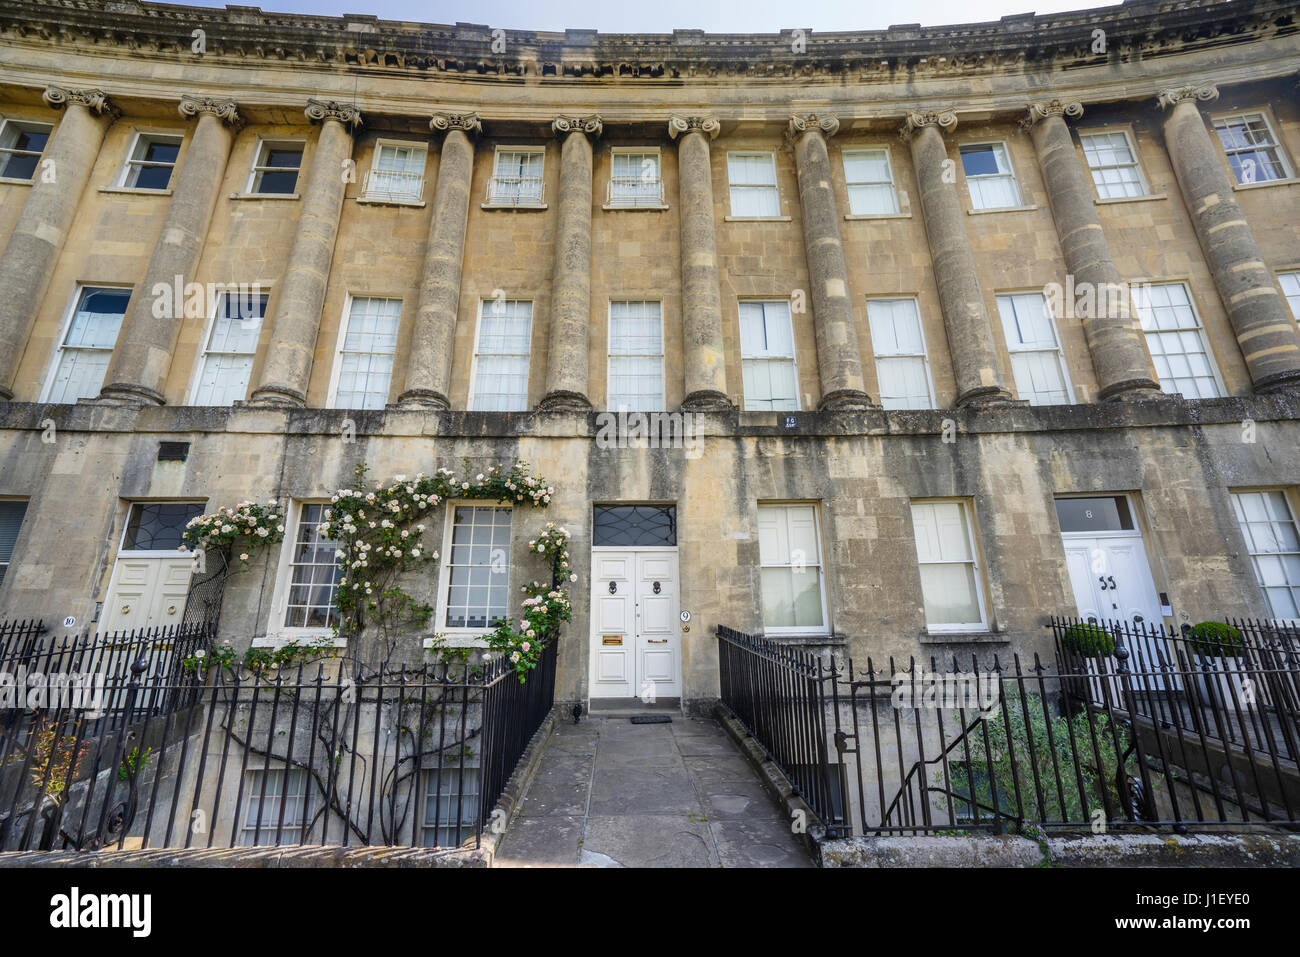 United Kingdom, Somerset, city of Bath, the Royal Crescent, terraced houses in Georgian architecture with Ionic columns Stock Photo